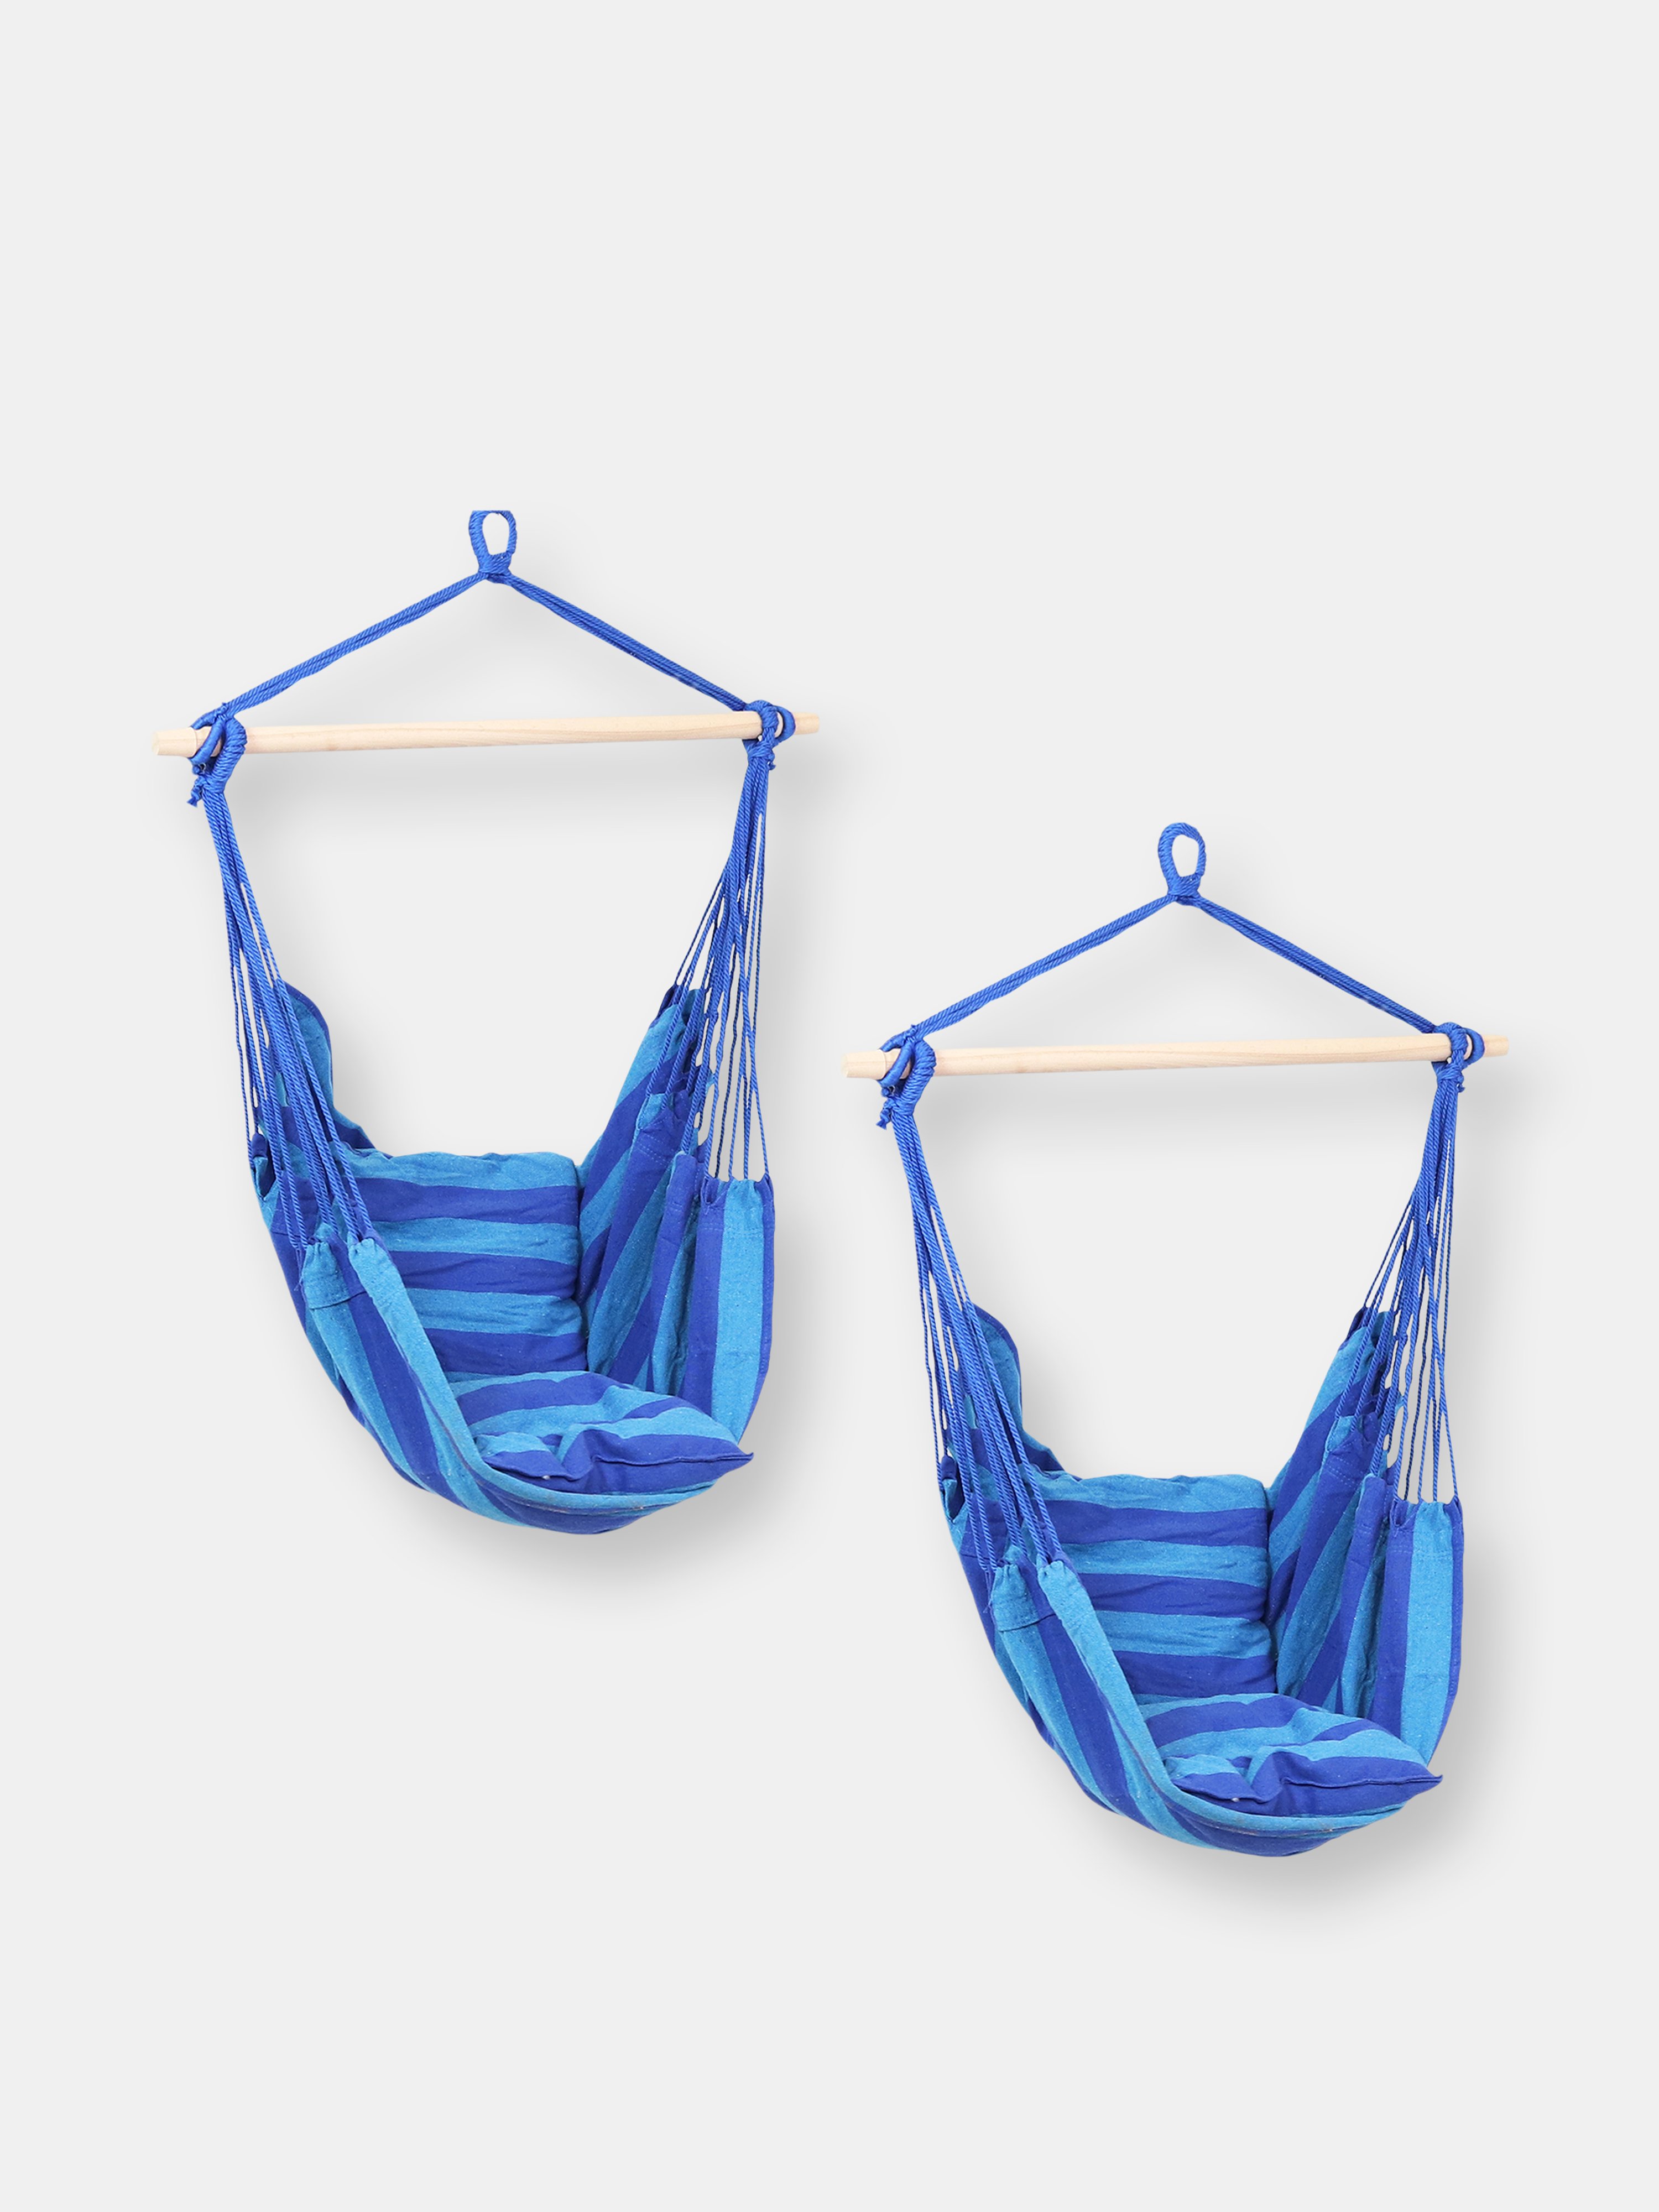 Hanging Hammock Chair Swing with 2 Seat Cushions in Ocean Breeze 